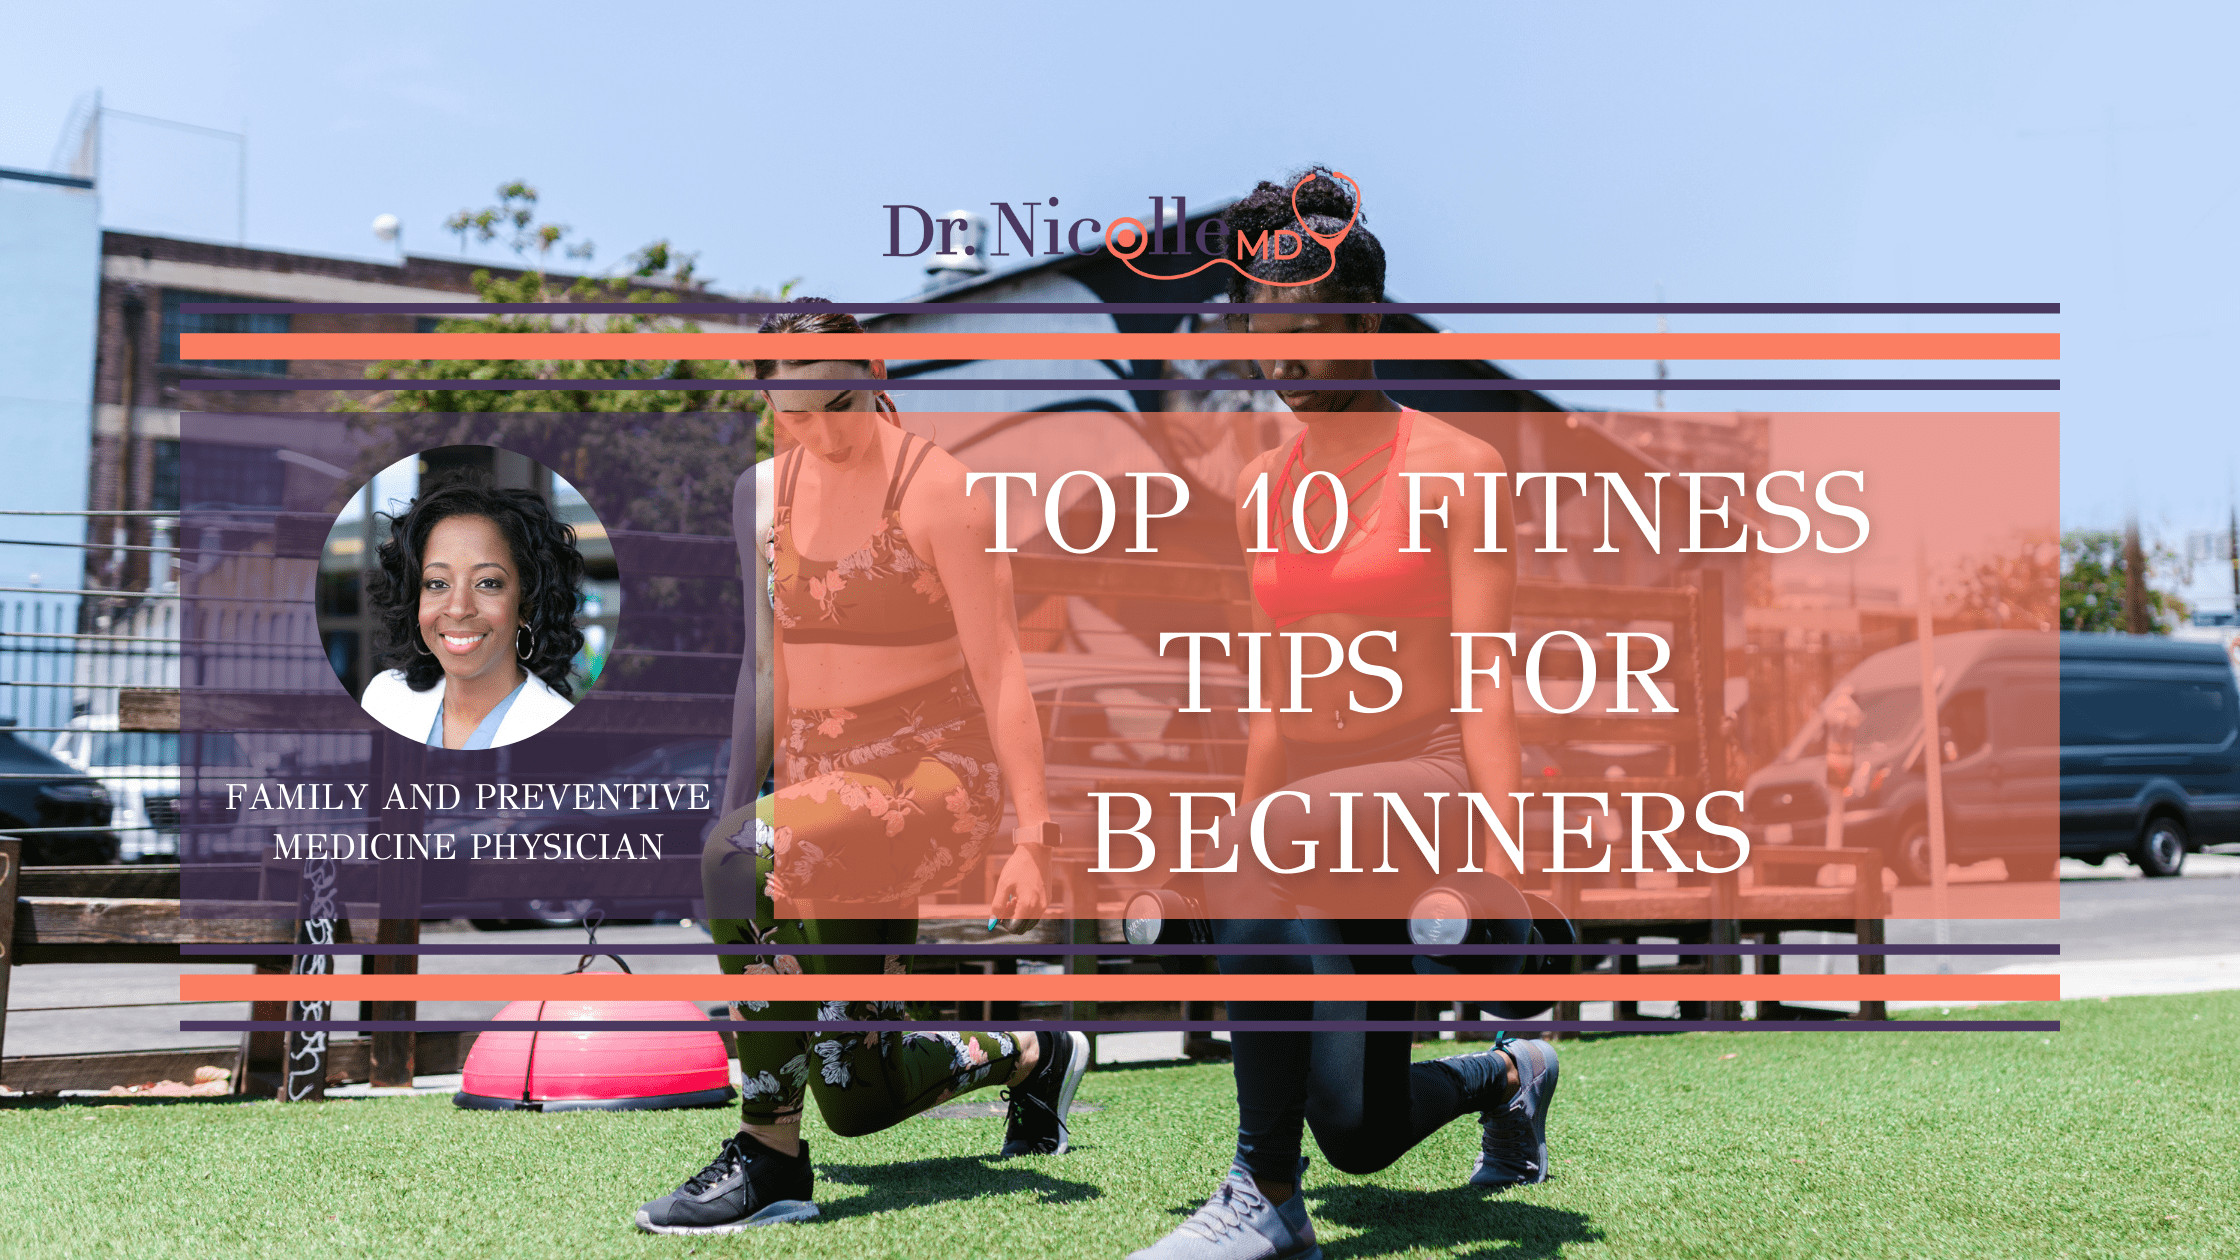 11Top 10 Fitness Tips for Beginners